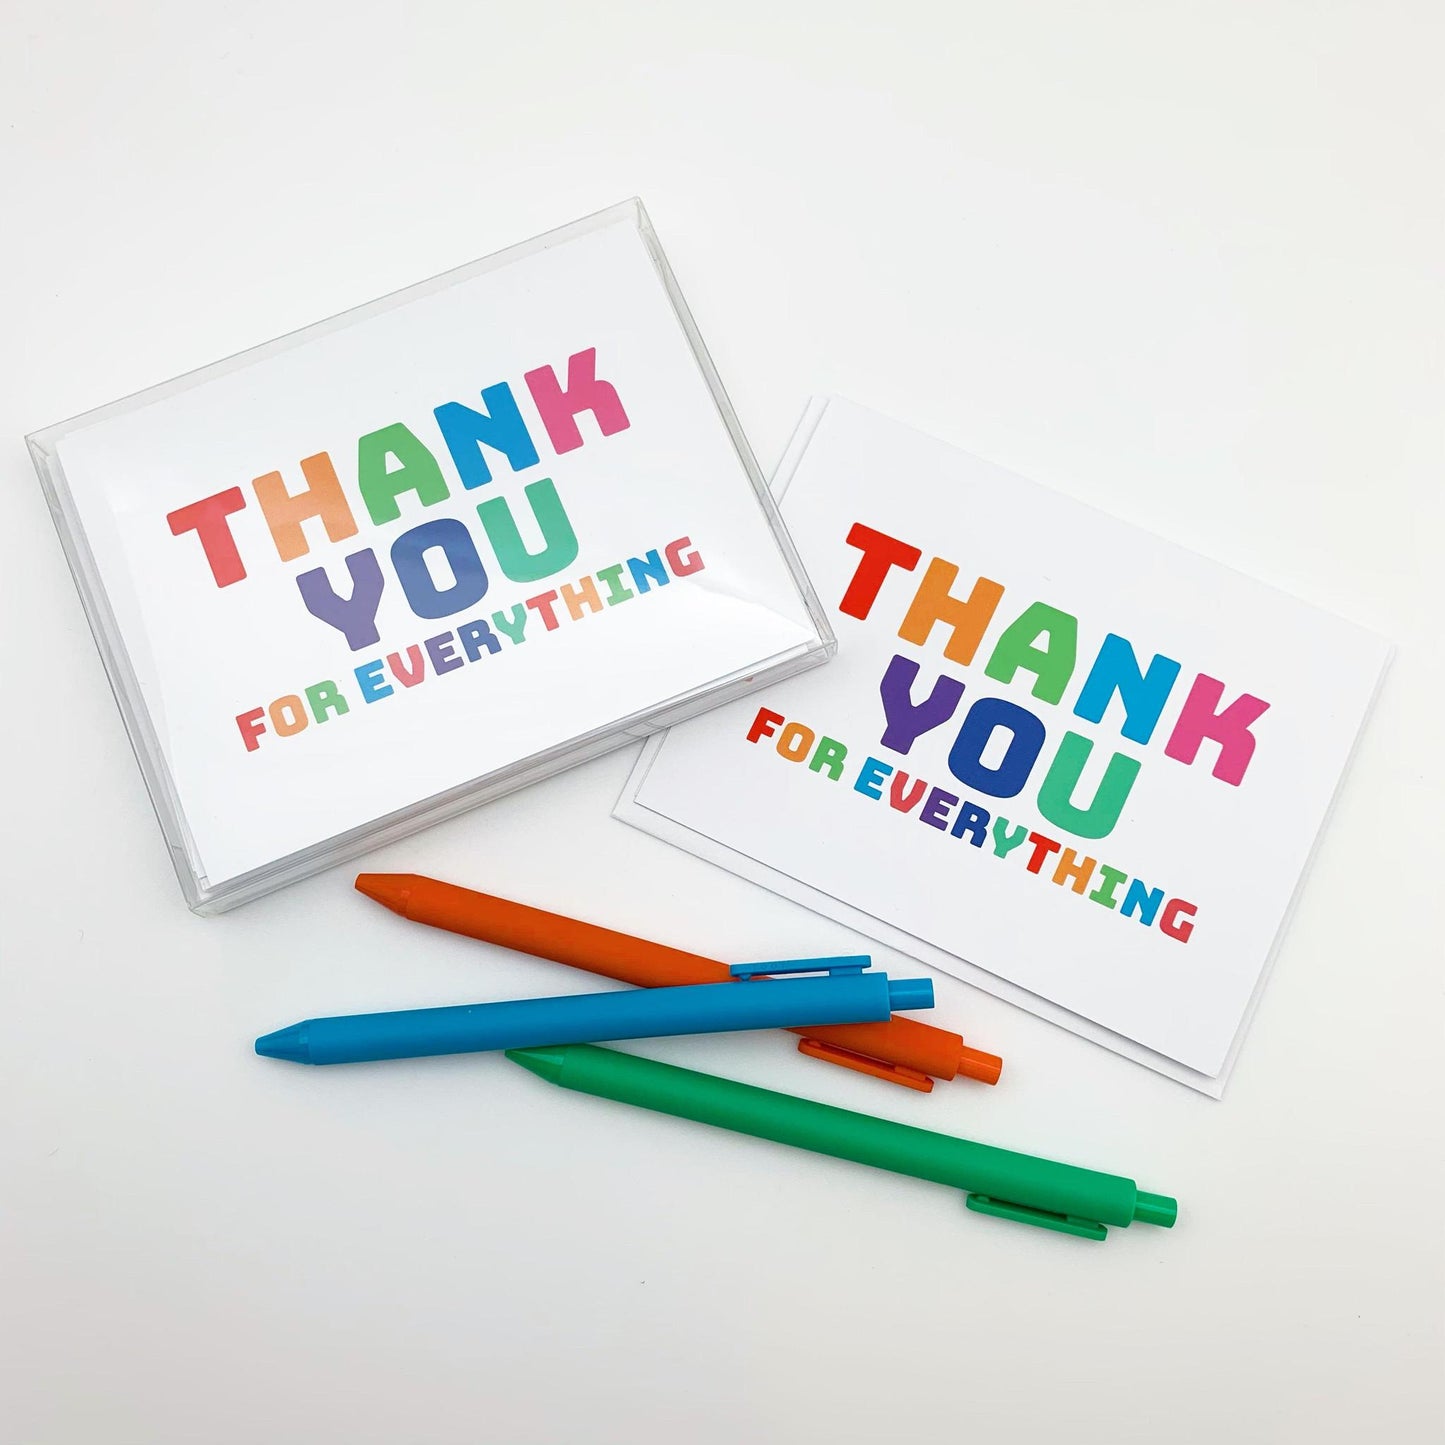 Greeting Card - "Thank You For Everything"